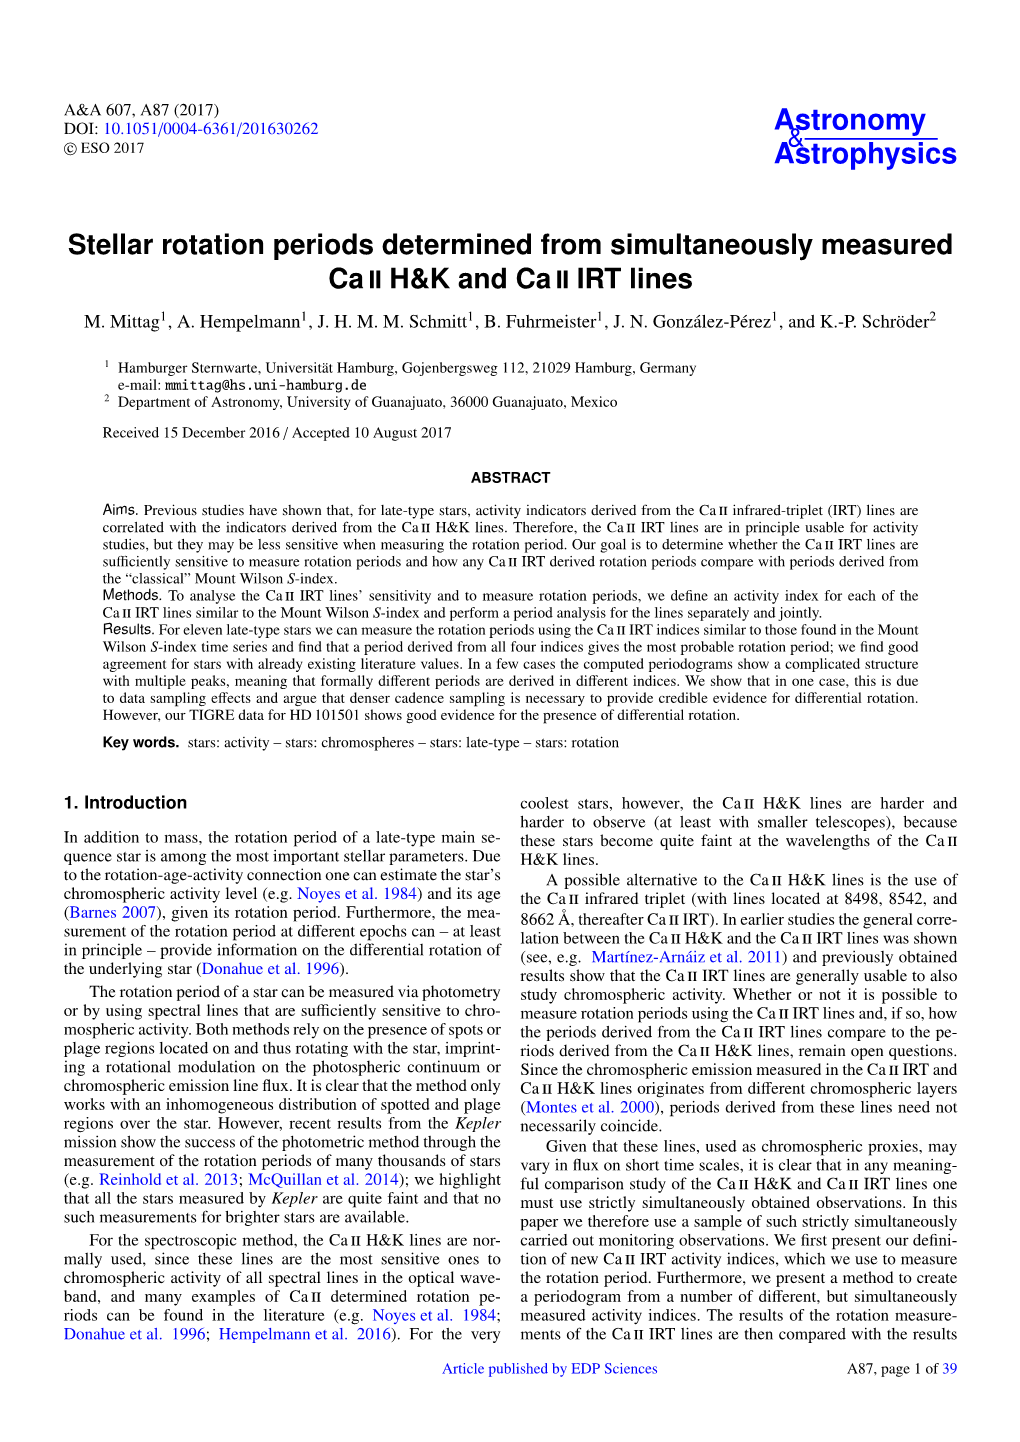 Stellar Rotation Periods Determined from Simultaneously Measured Ca Ii H&K and Ca Ii IRT Lines M